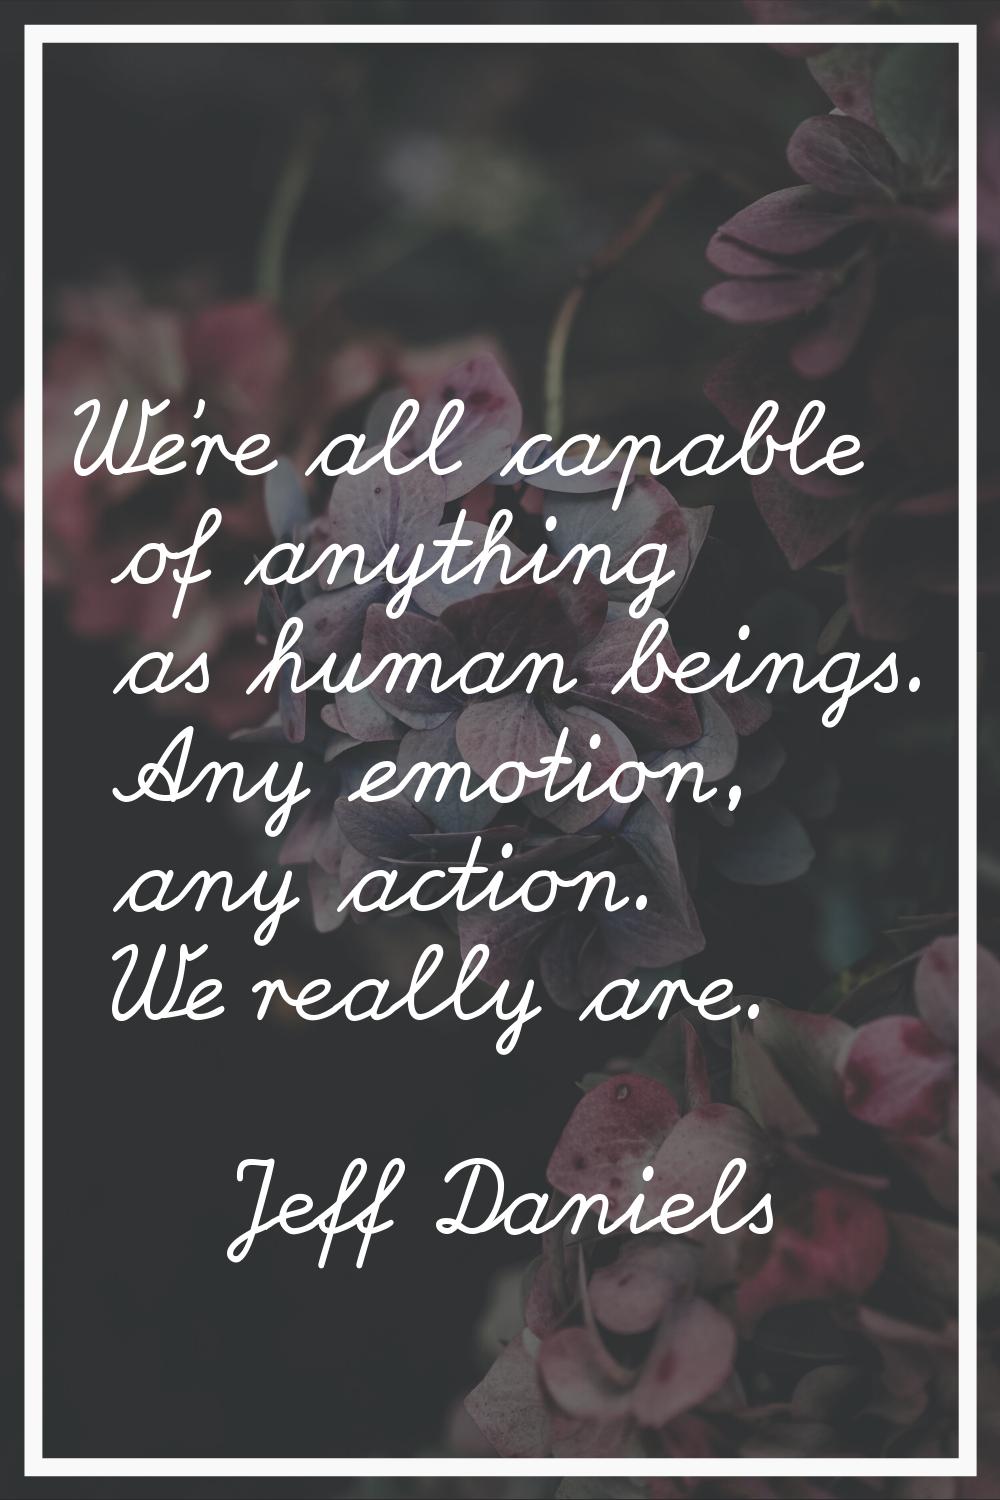 We're all capable of anything as human beings. Any emotion, any action. We really are.